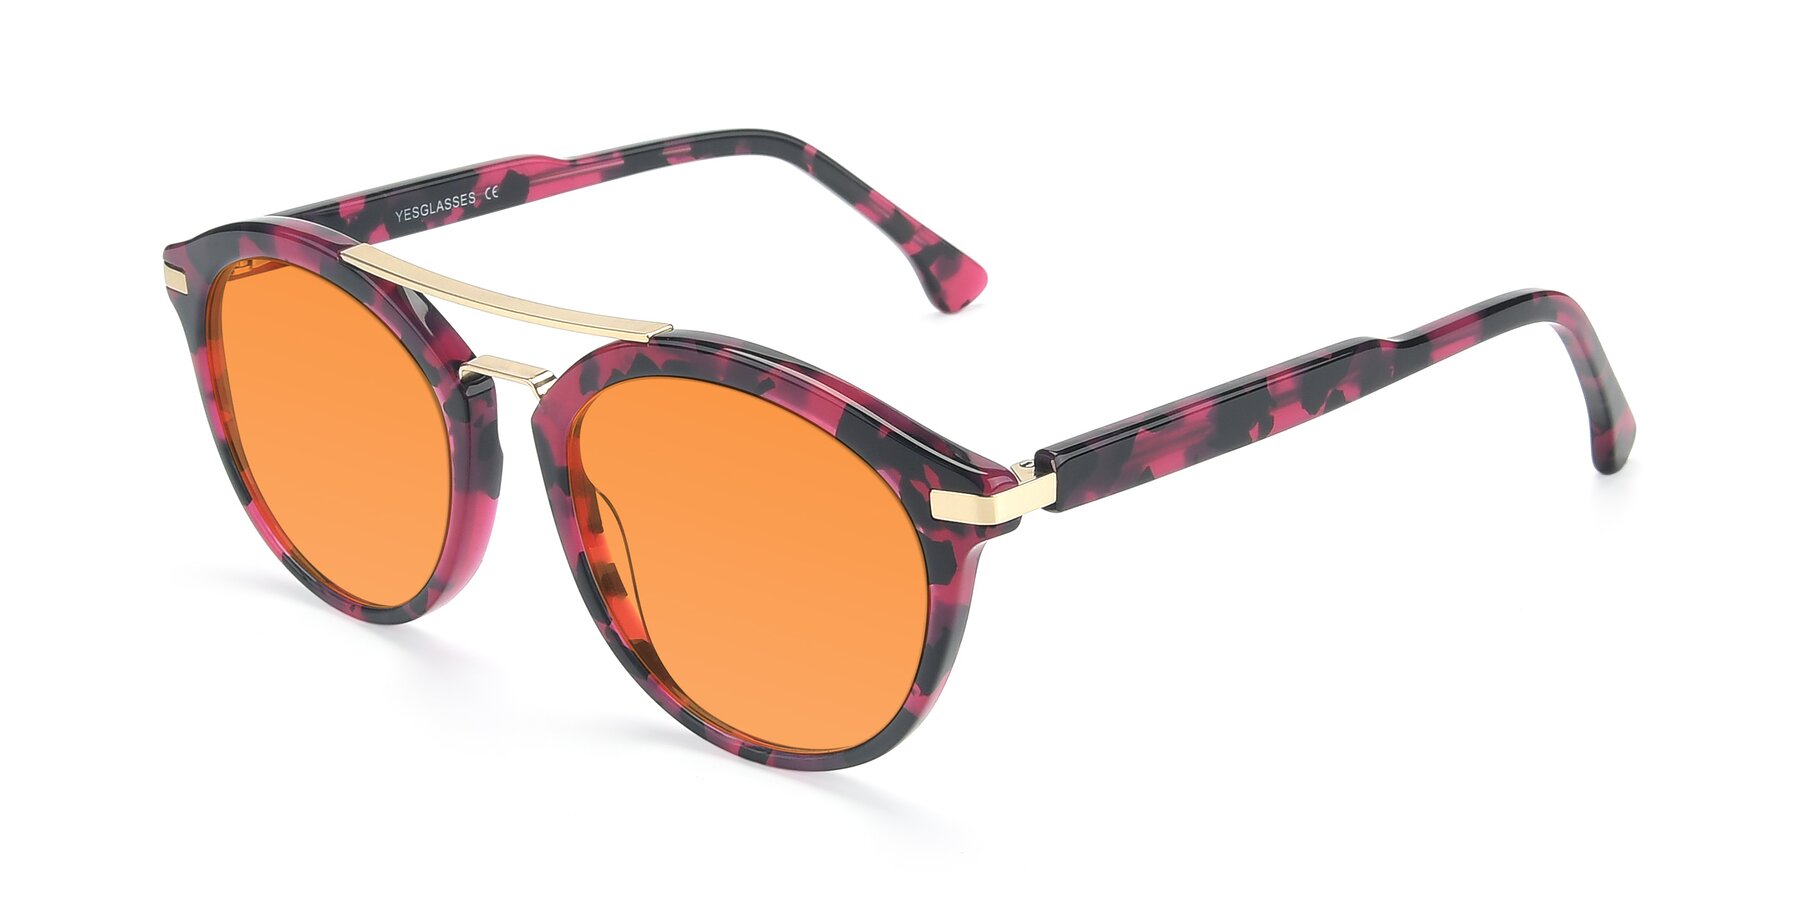 Angle of 17236 in Wine Tortoise with Orange Tinted Lenses